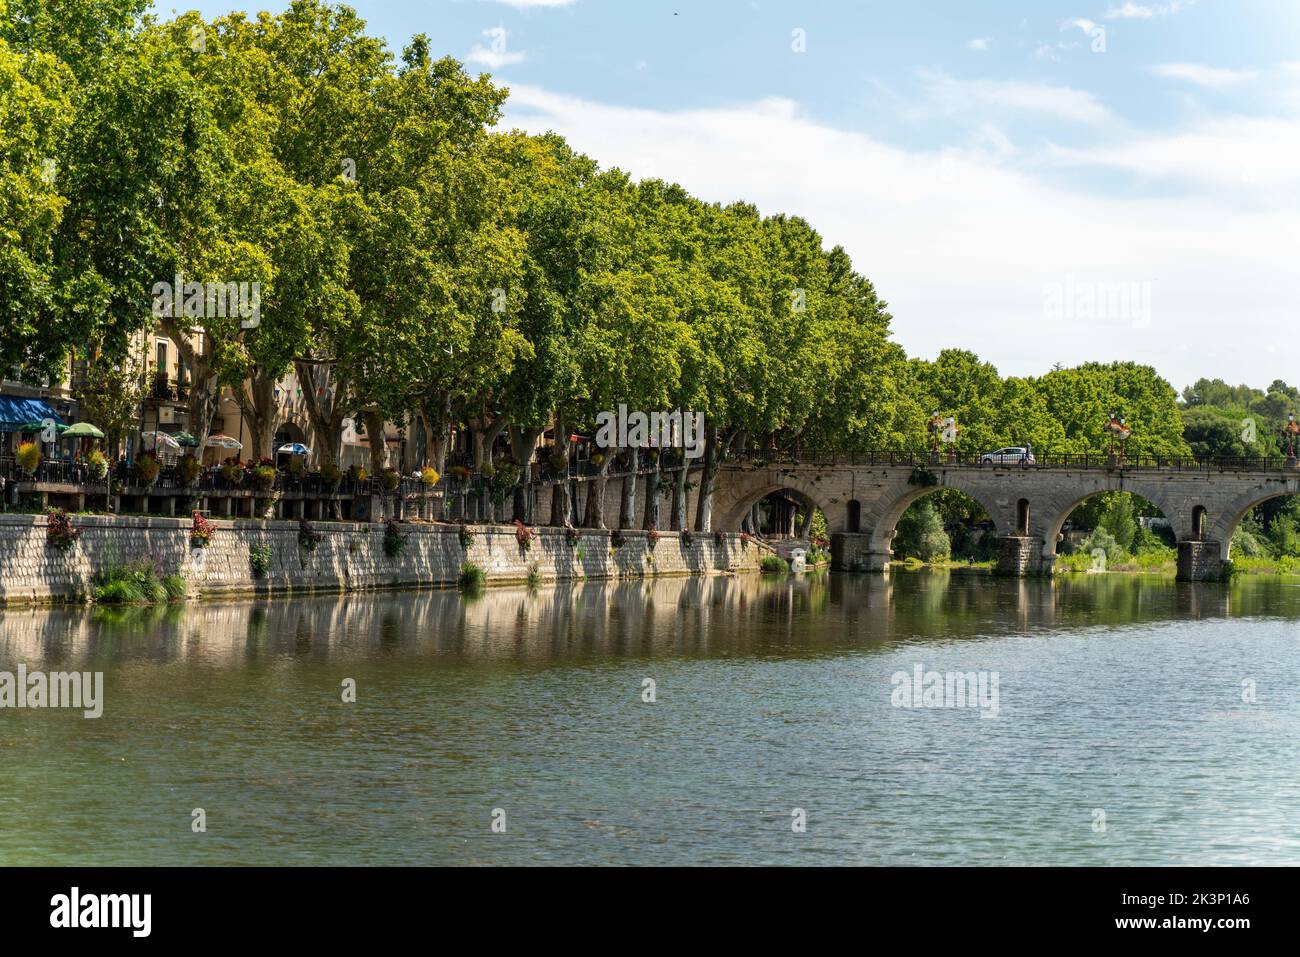 A beautiful view of a river surrounded by trees on a sunny day in Sommieres, Gard, France Stock Photo